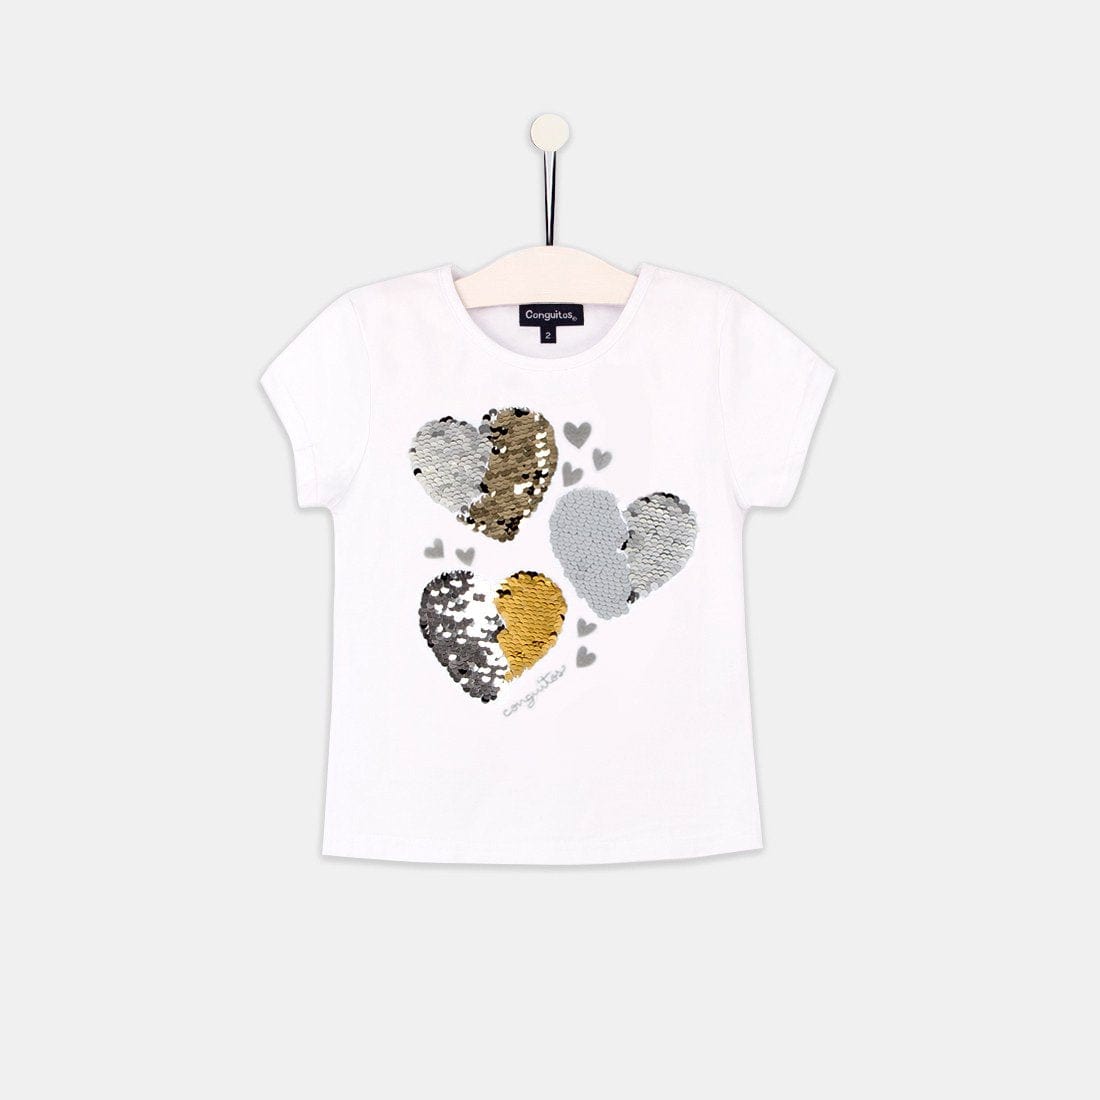 CONGUITOS TEXTIL Clothing Girls "Hearts" White Reversible Sequins T-shirt